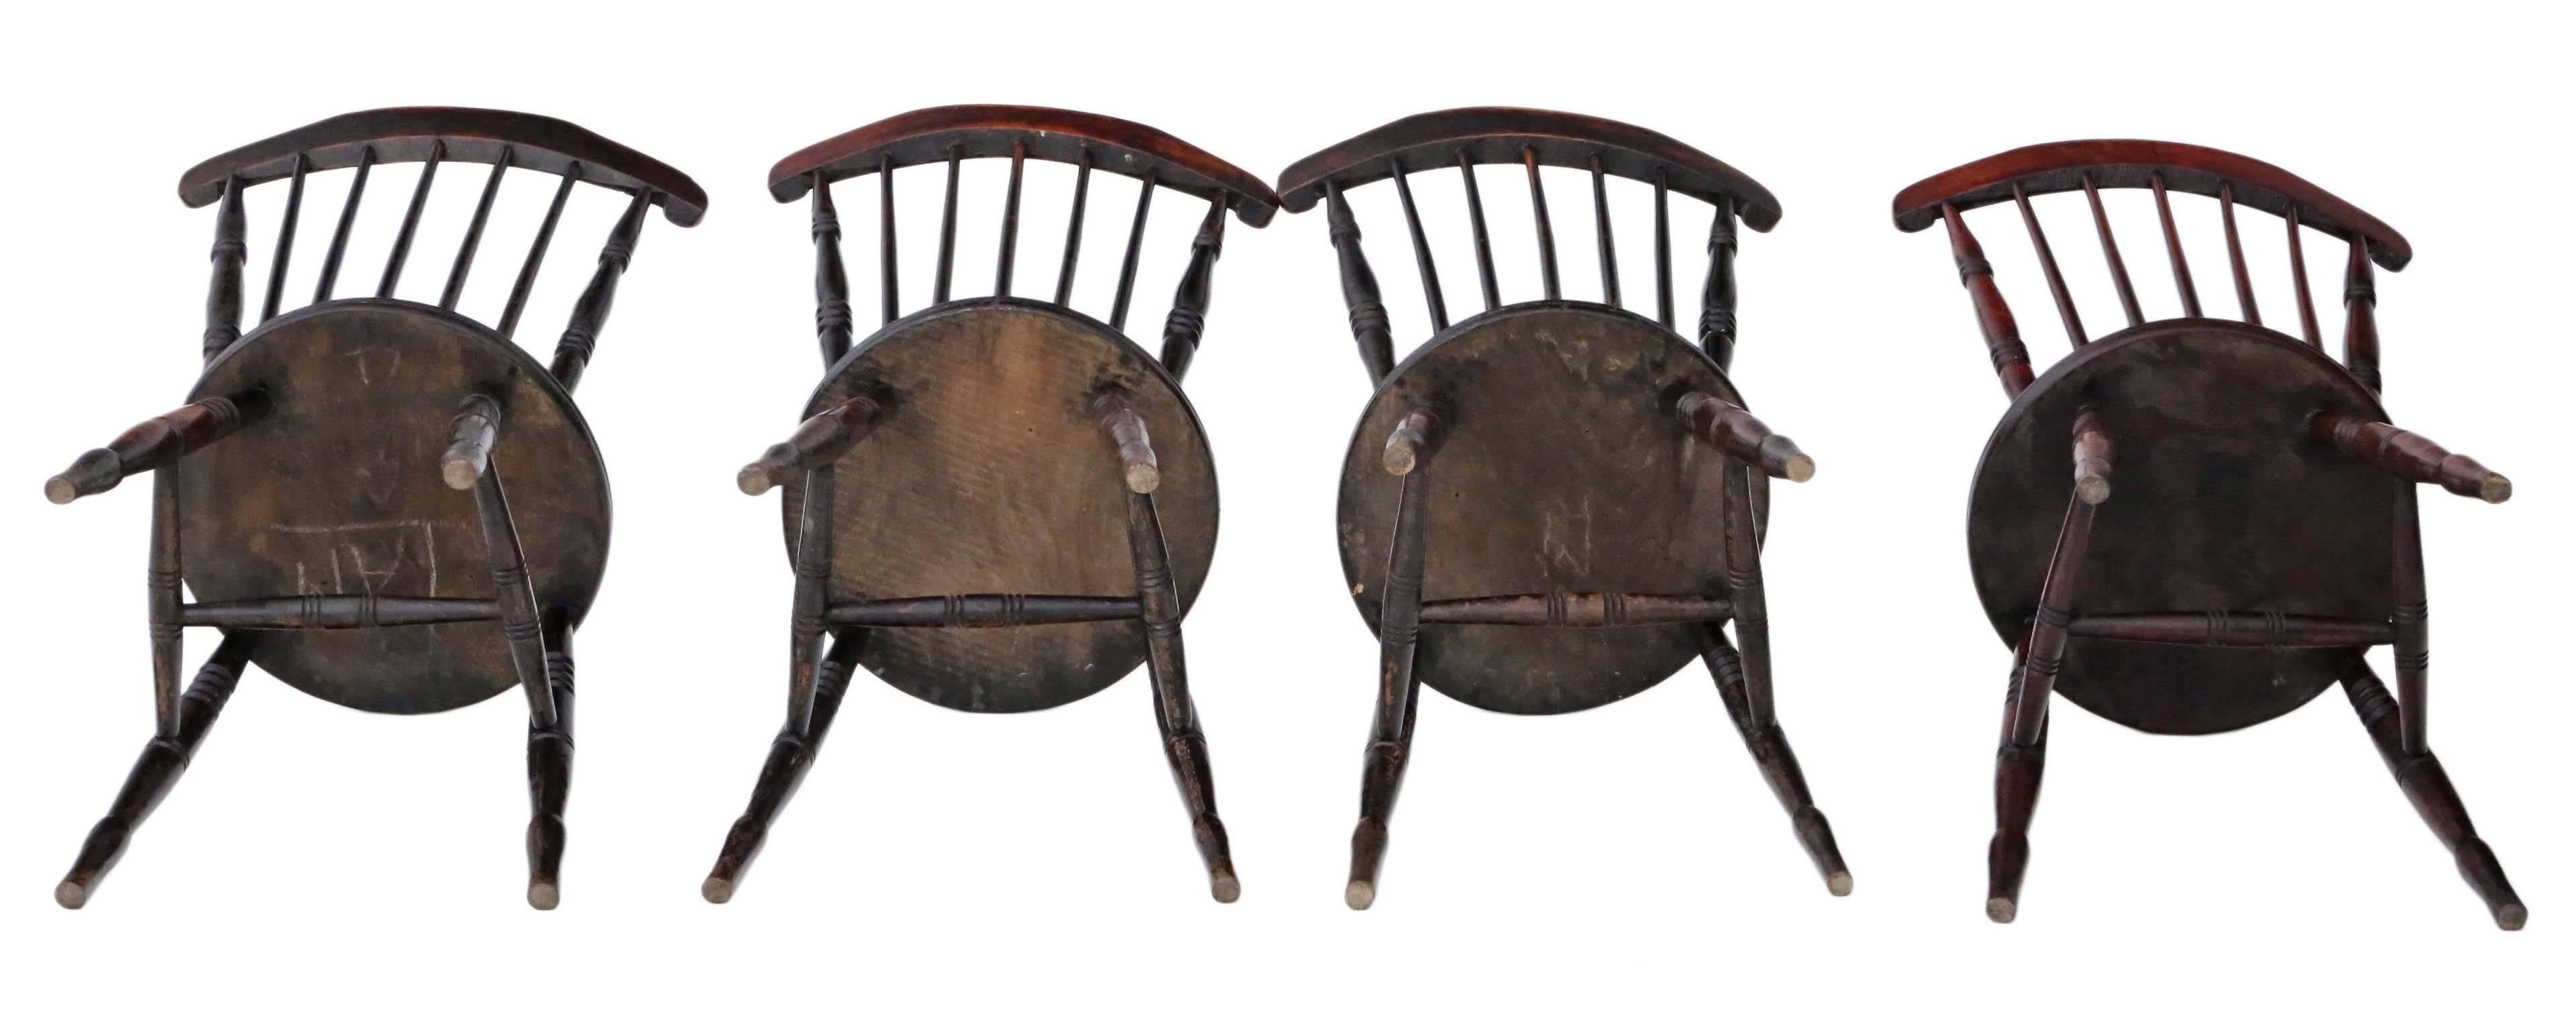 Antique Set of Four Victorian Penny Windsor Kitchen Dining Chairs, circa 1890 In Good Condition For Sale In Wisbech, Walton Wisbech